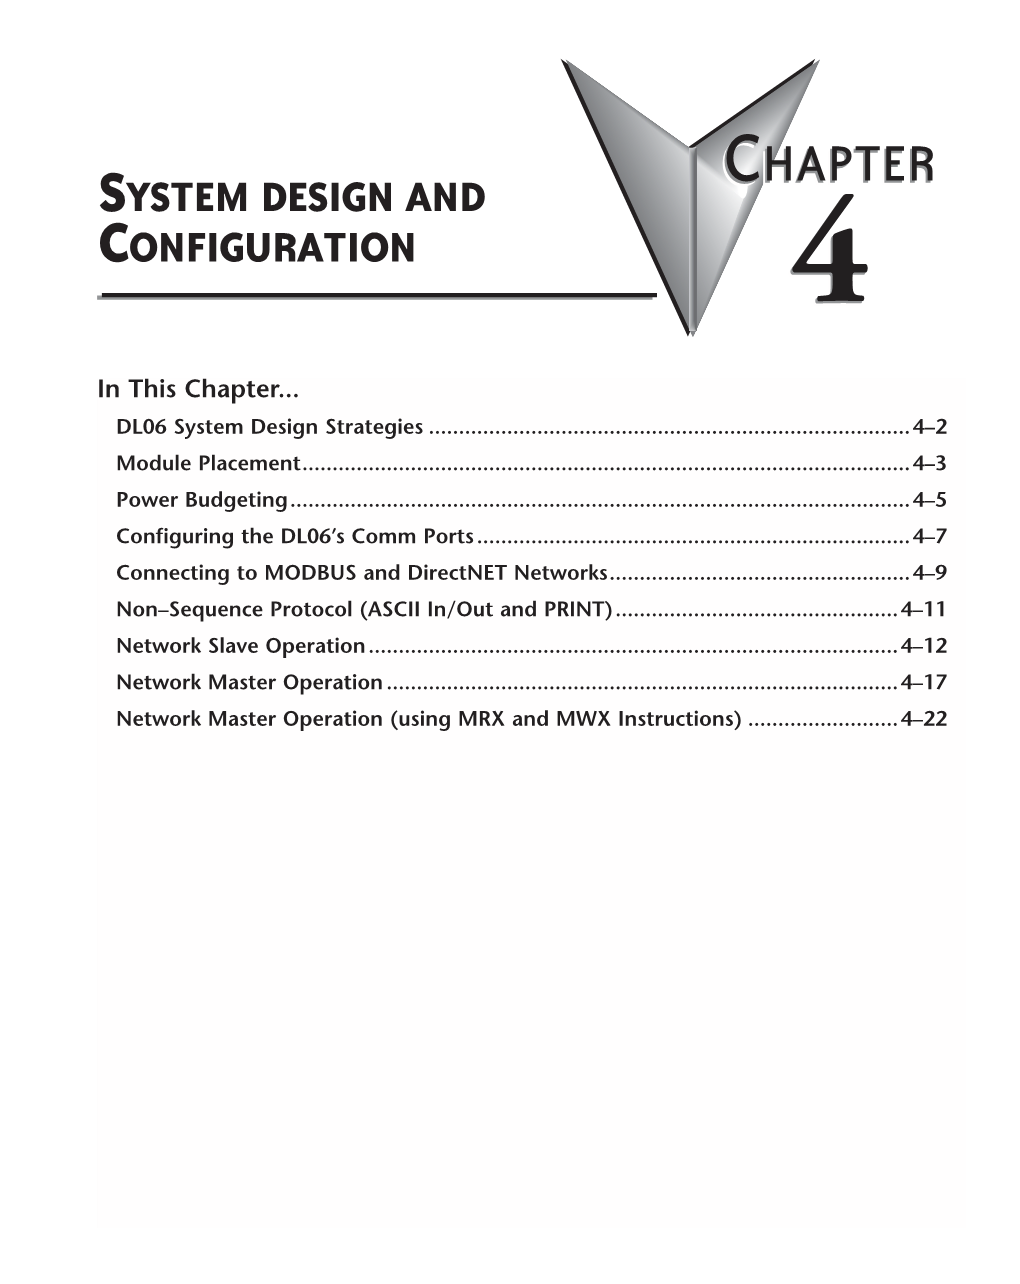 Chapter 4: System Design and Configuration DL06 System Design Strategies I/O System Configurations the DL06 Plcs Offer a Number of Different I/O Configurations